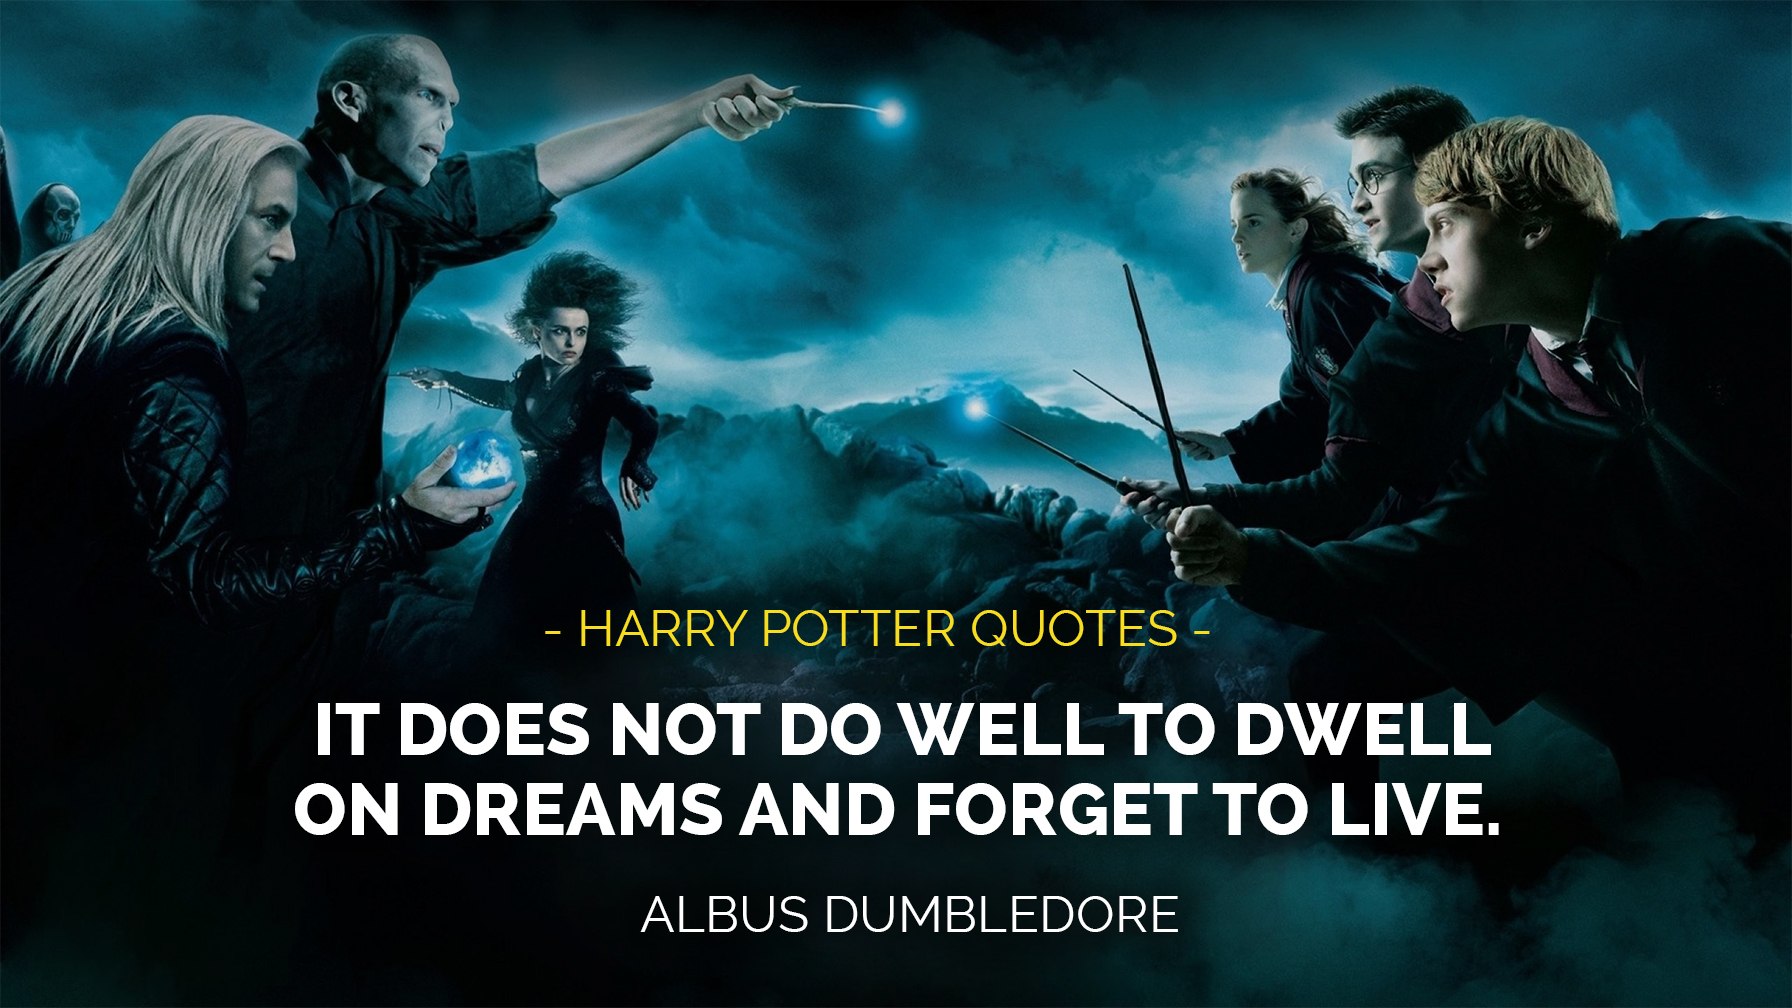 20 Best Harry Potter Quotes That’ll Put A Spell On You